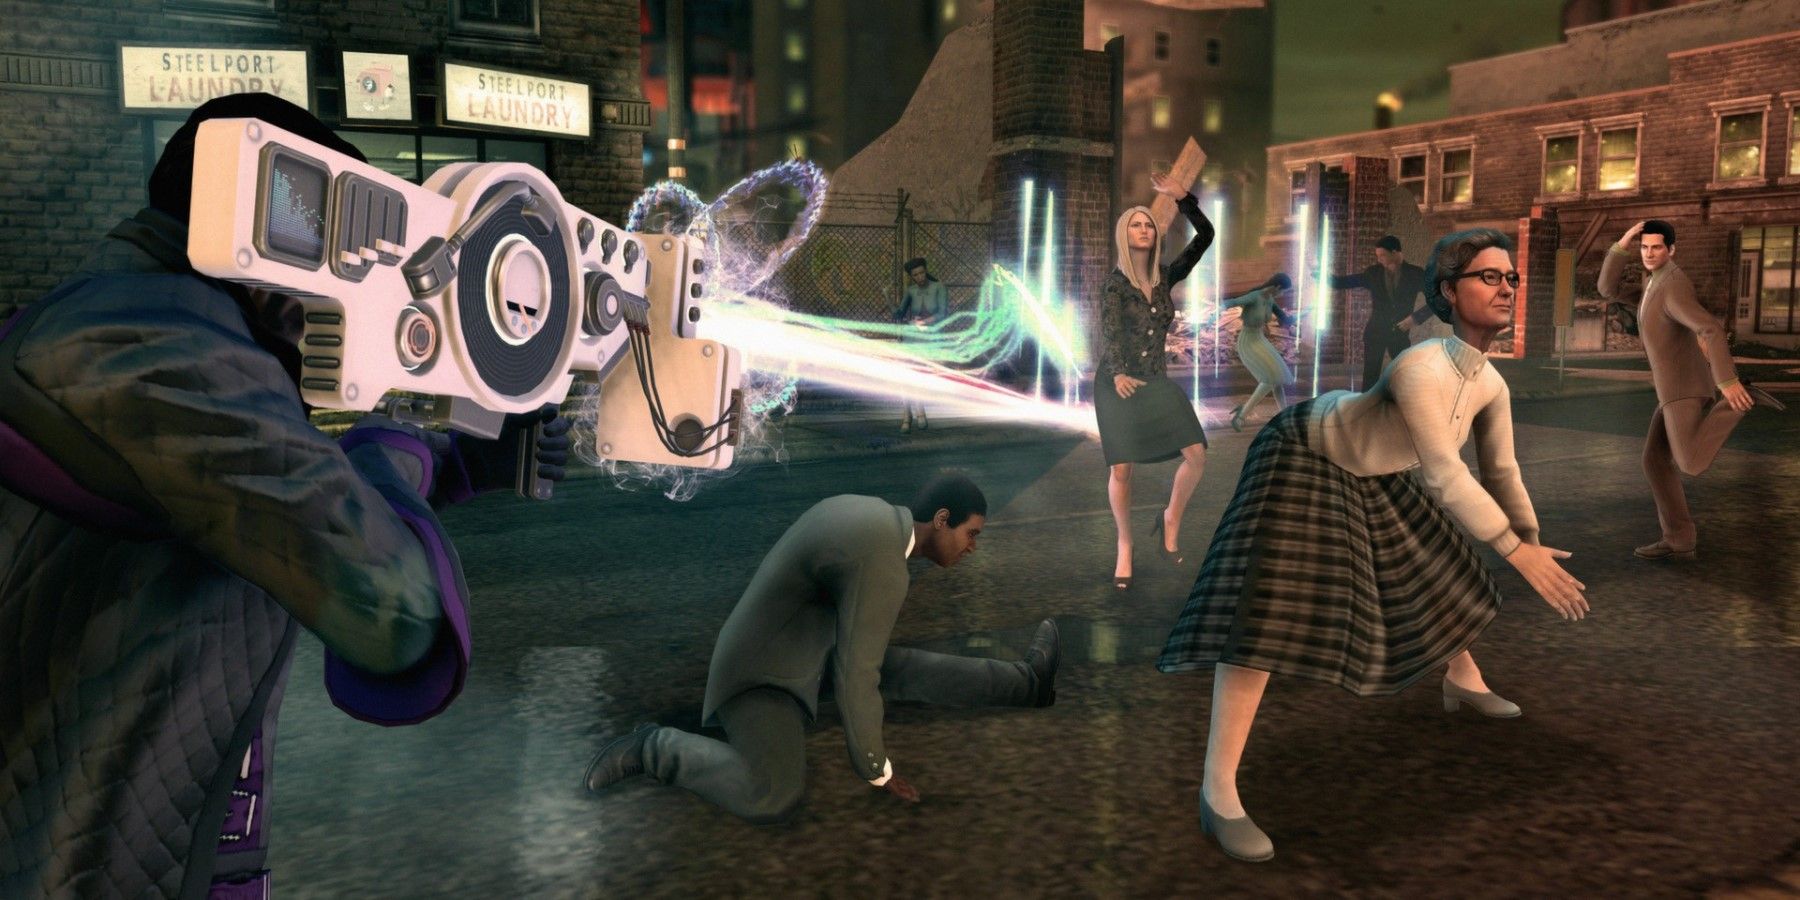 Saints Row IV is relentlessly funny and surprisingly touching